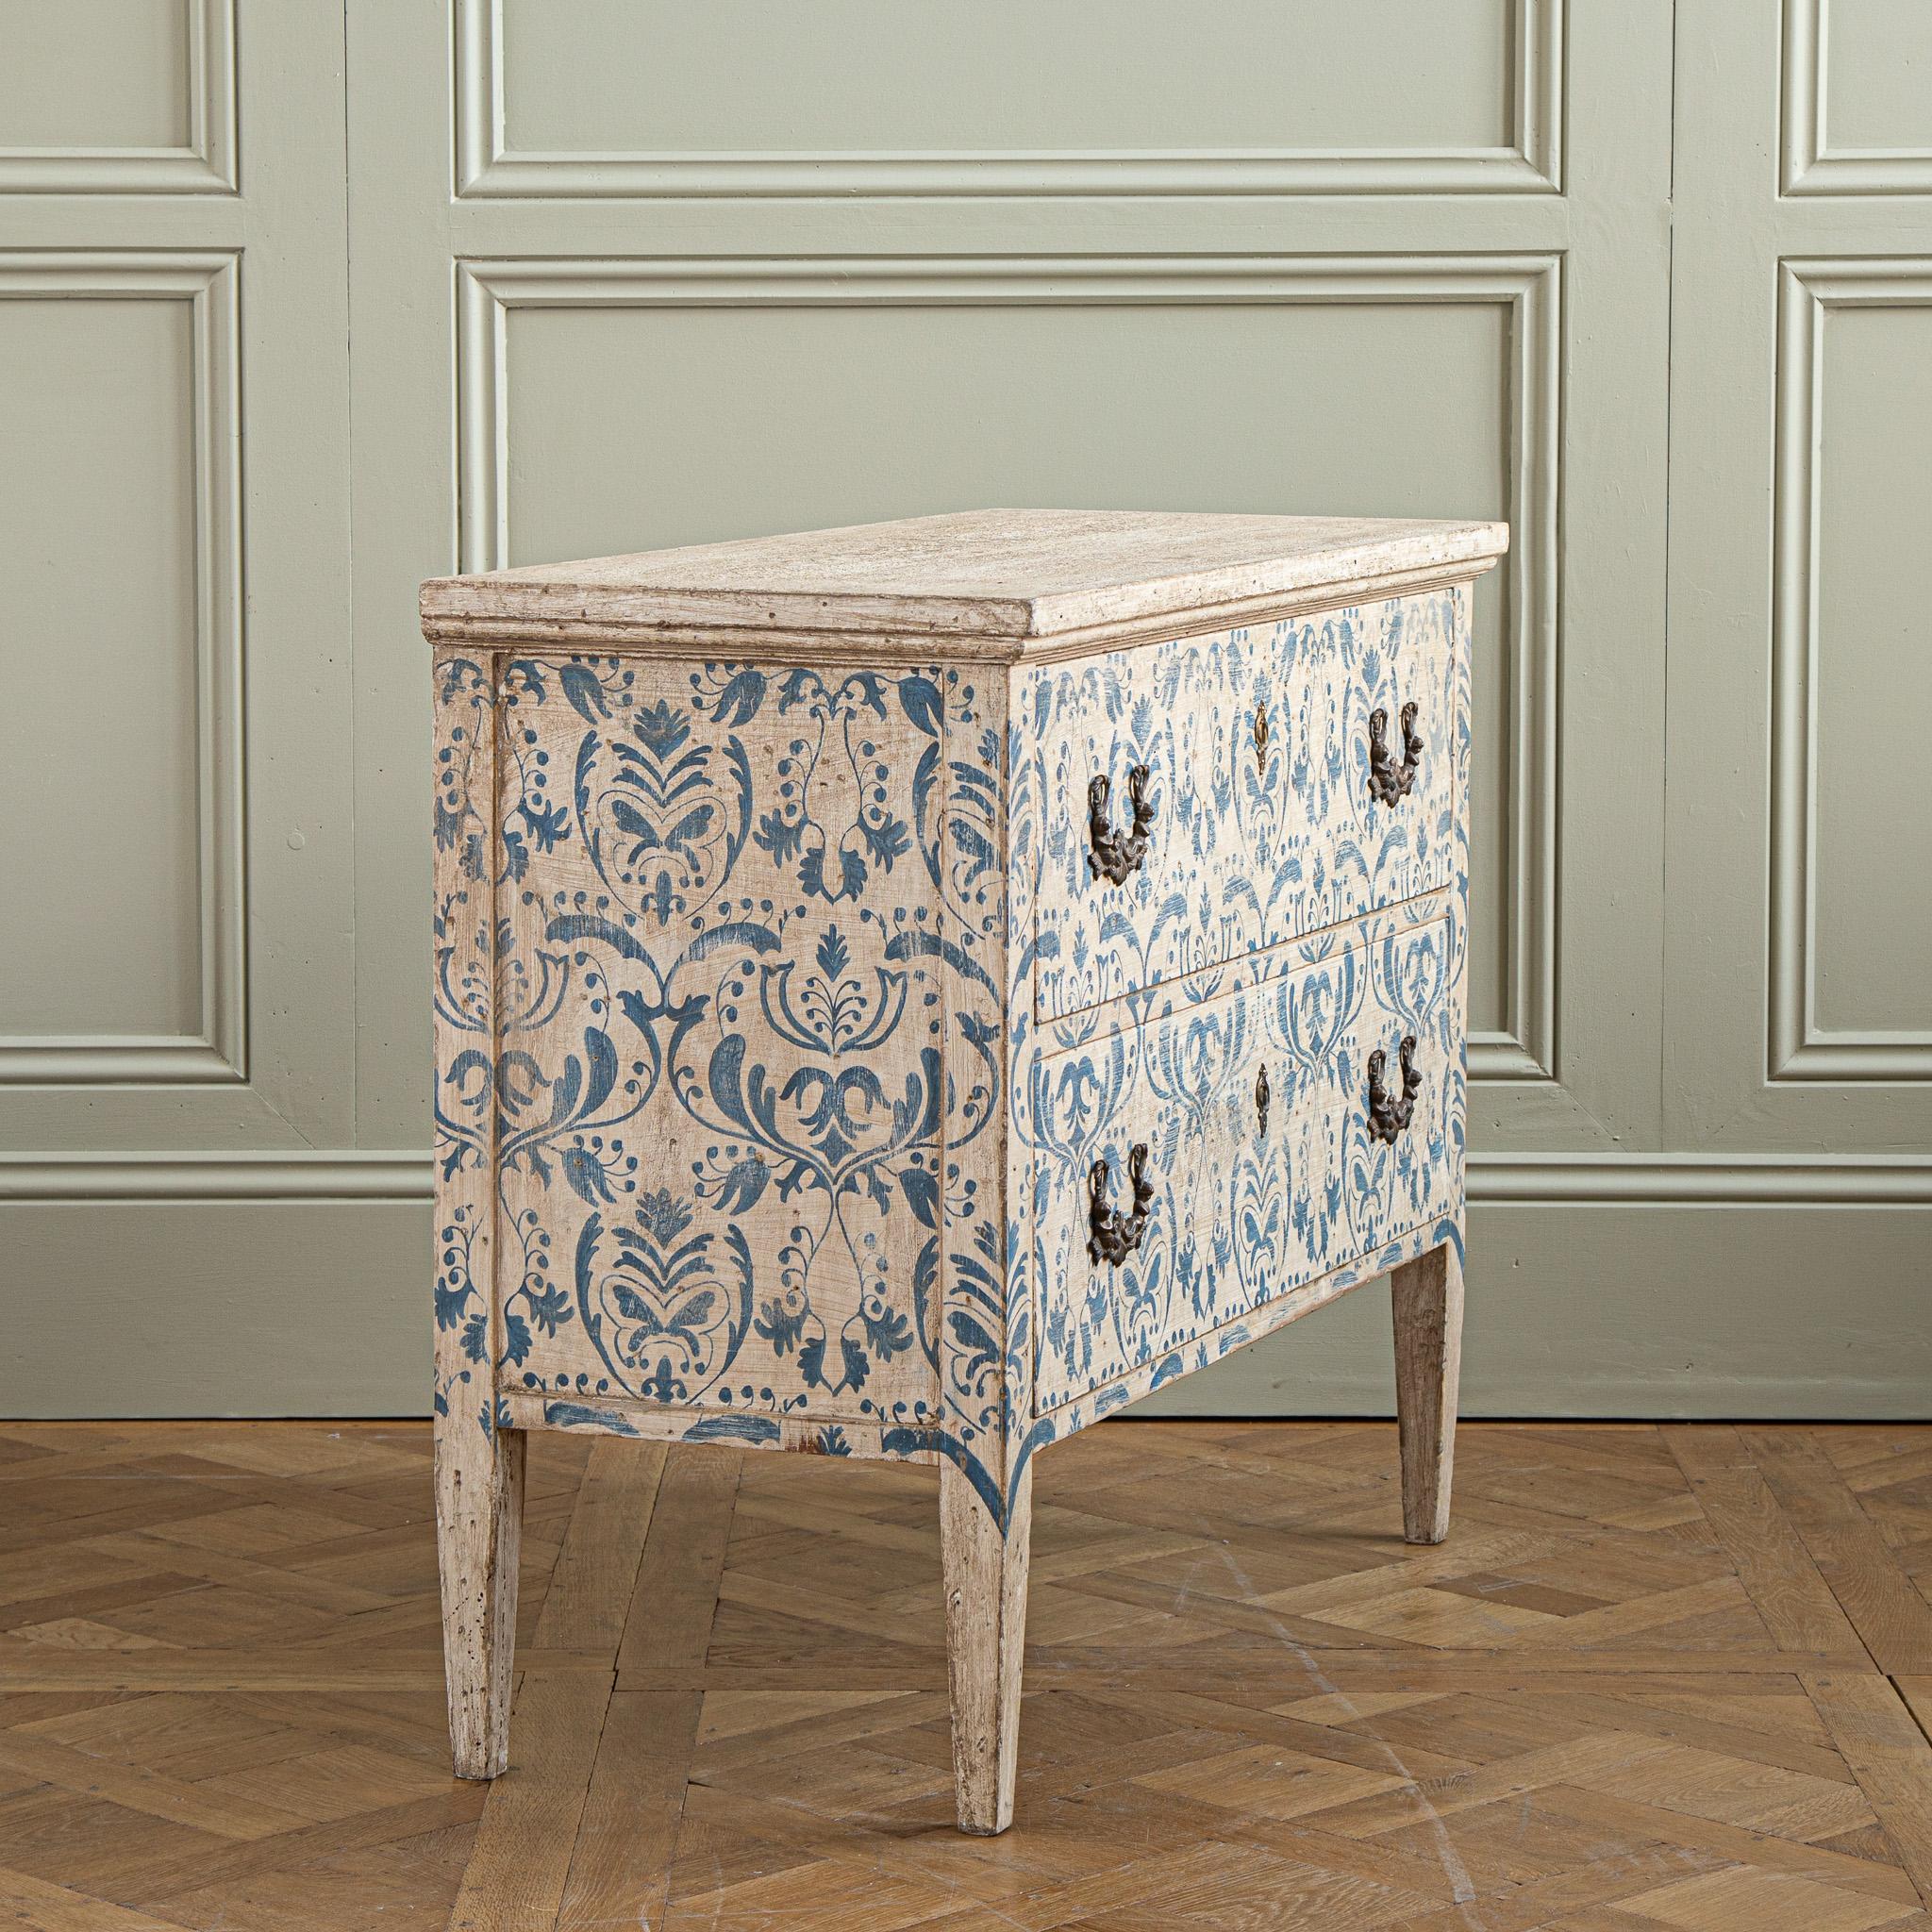 A vivid Italian Chest Of Drawers, hand painted in the traditional Florentine style featuring an aged Indigo Blue, flora and foliage motif on a background of antique white. The motif covers the front and both sides of the body to be viewed from all